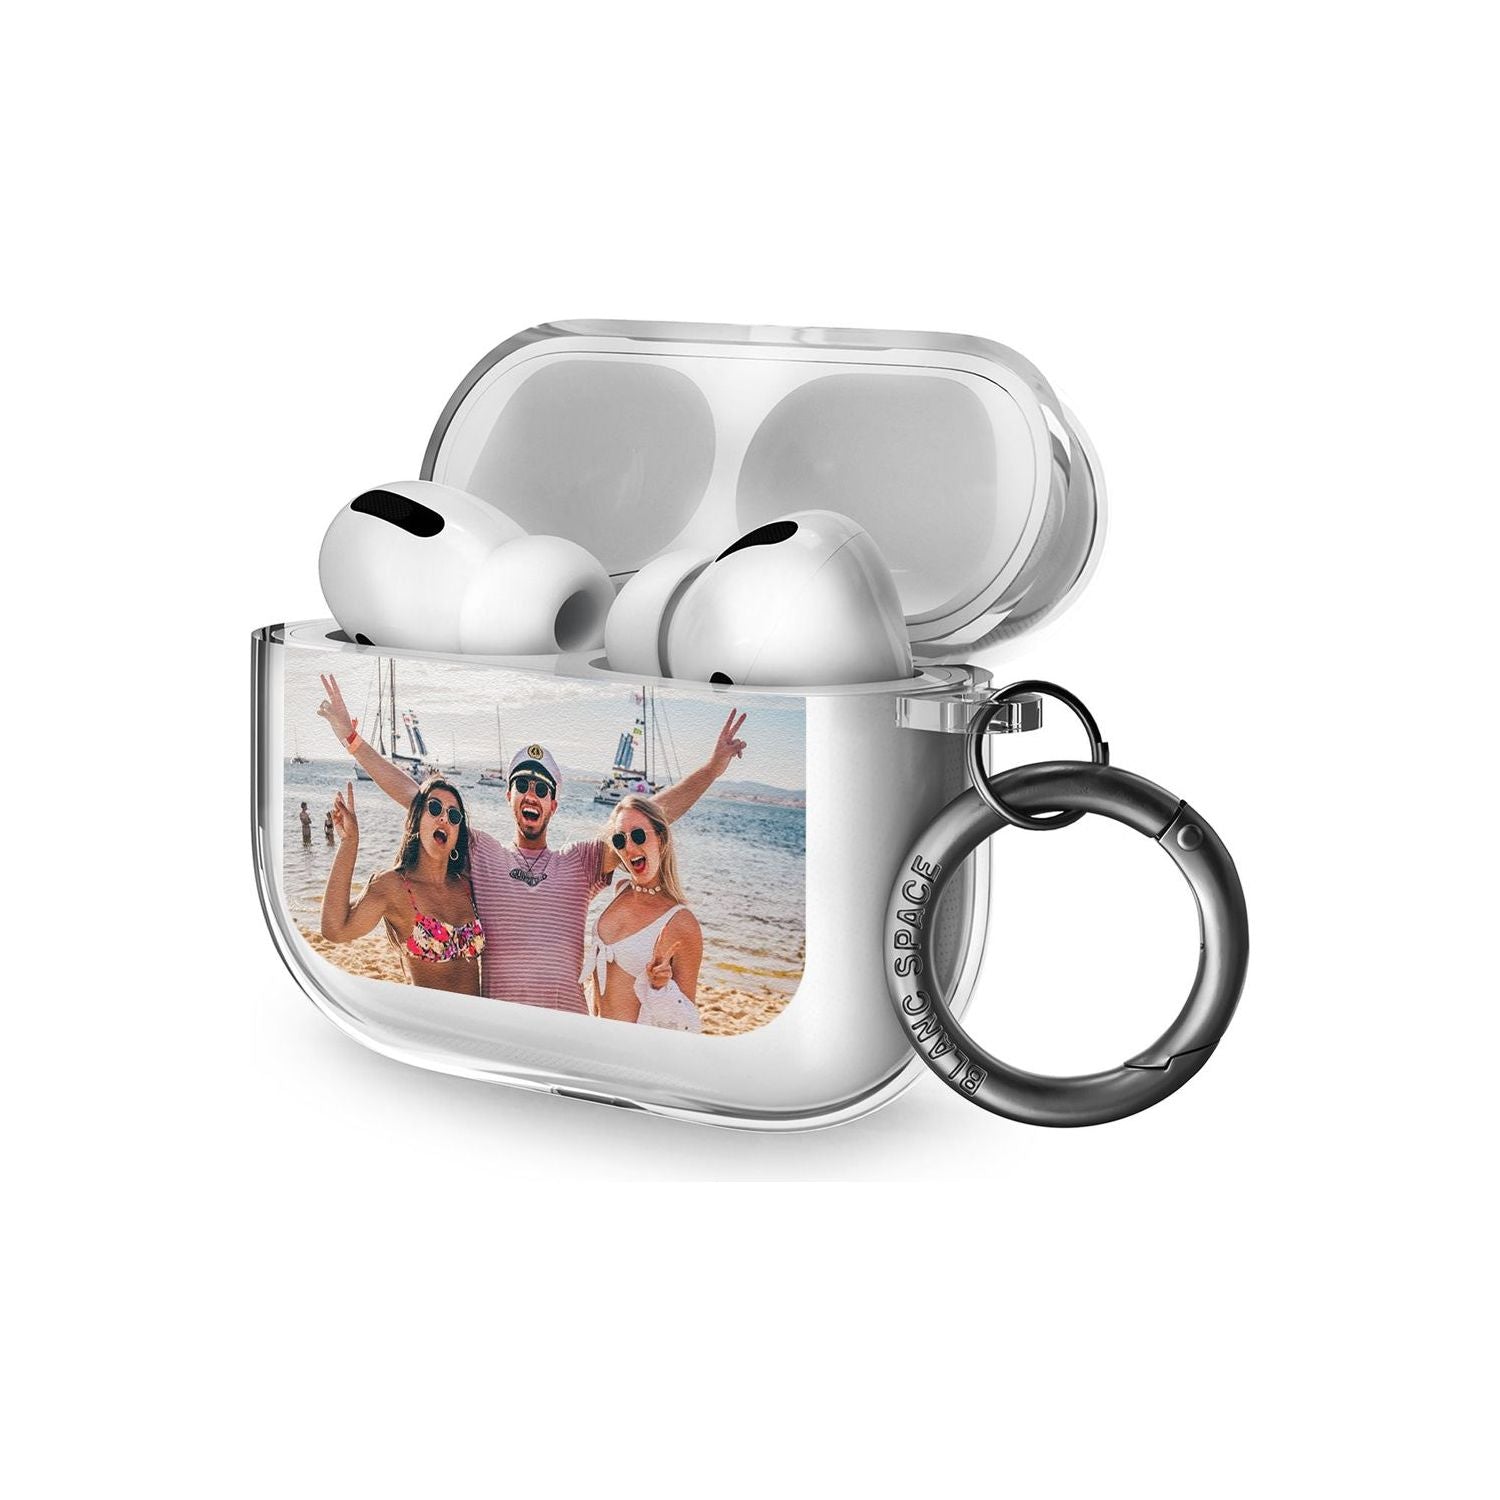 Photo Airpods Pro Case